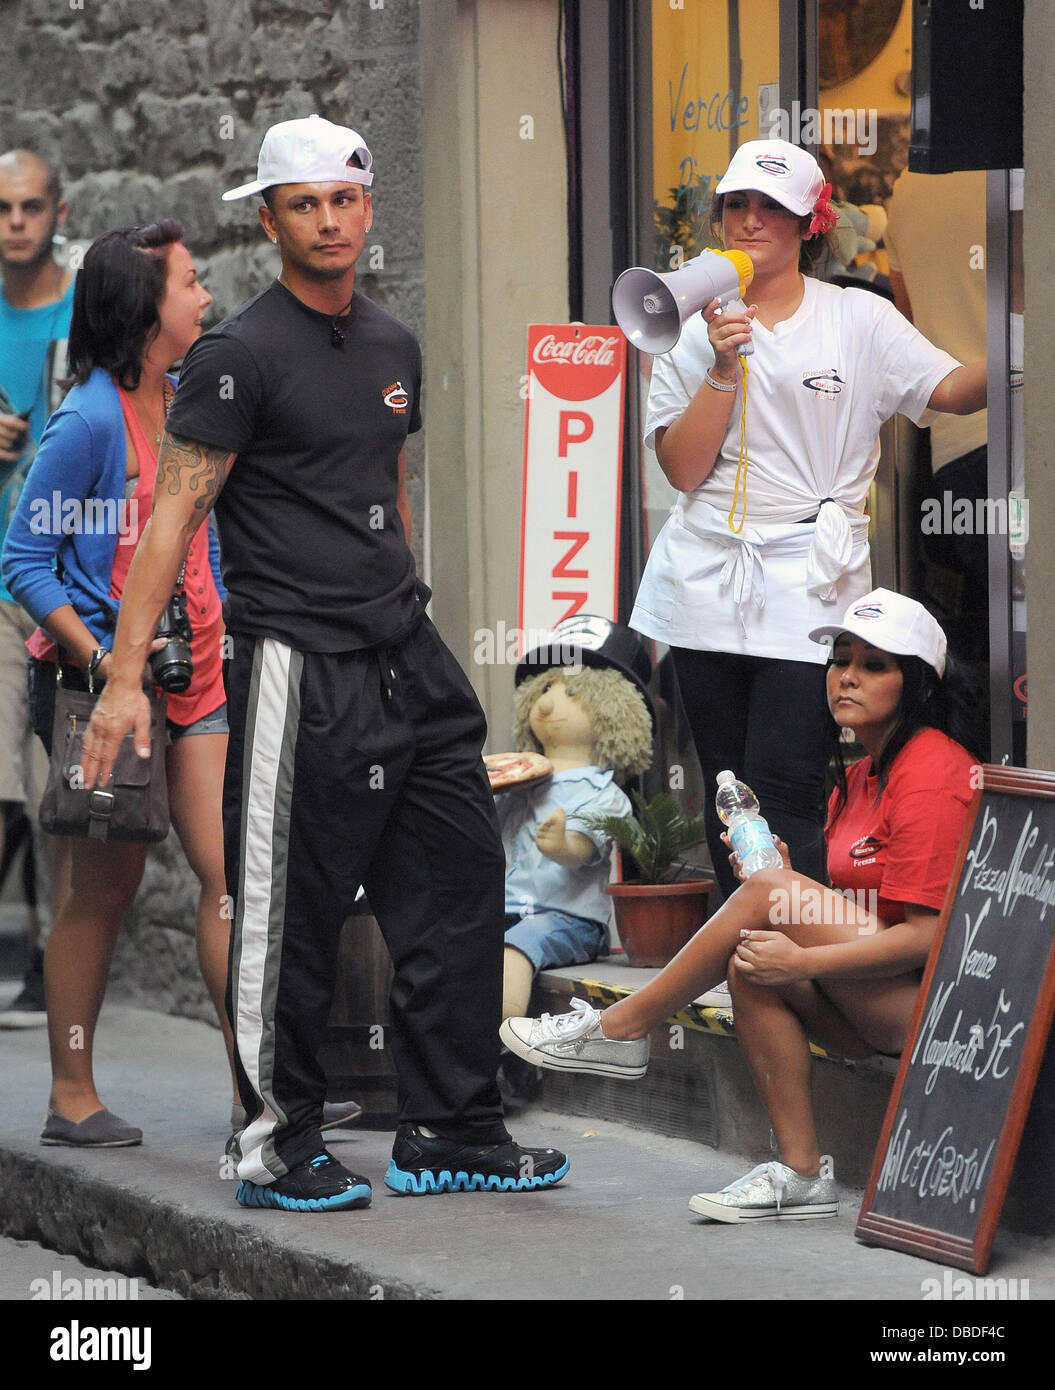 Paul 'Pauly D' DelVecchio, Deena Nicole Cortese and Nicole 'Snookie' Polizzi Attempt to entice people into the pizza shop they are working at for the summer, by using a megaphone! Florence, Italy - 23.05.11 Stock Photo